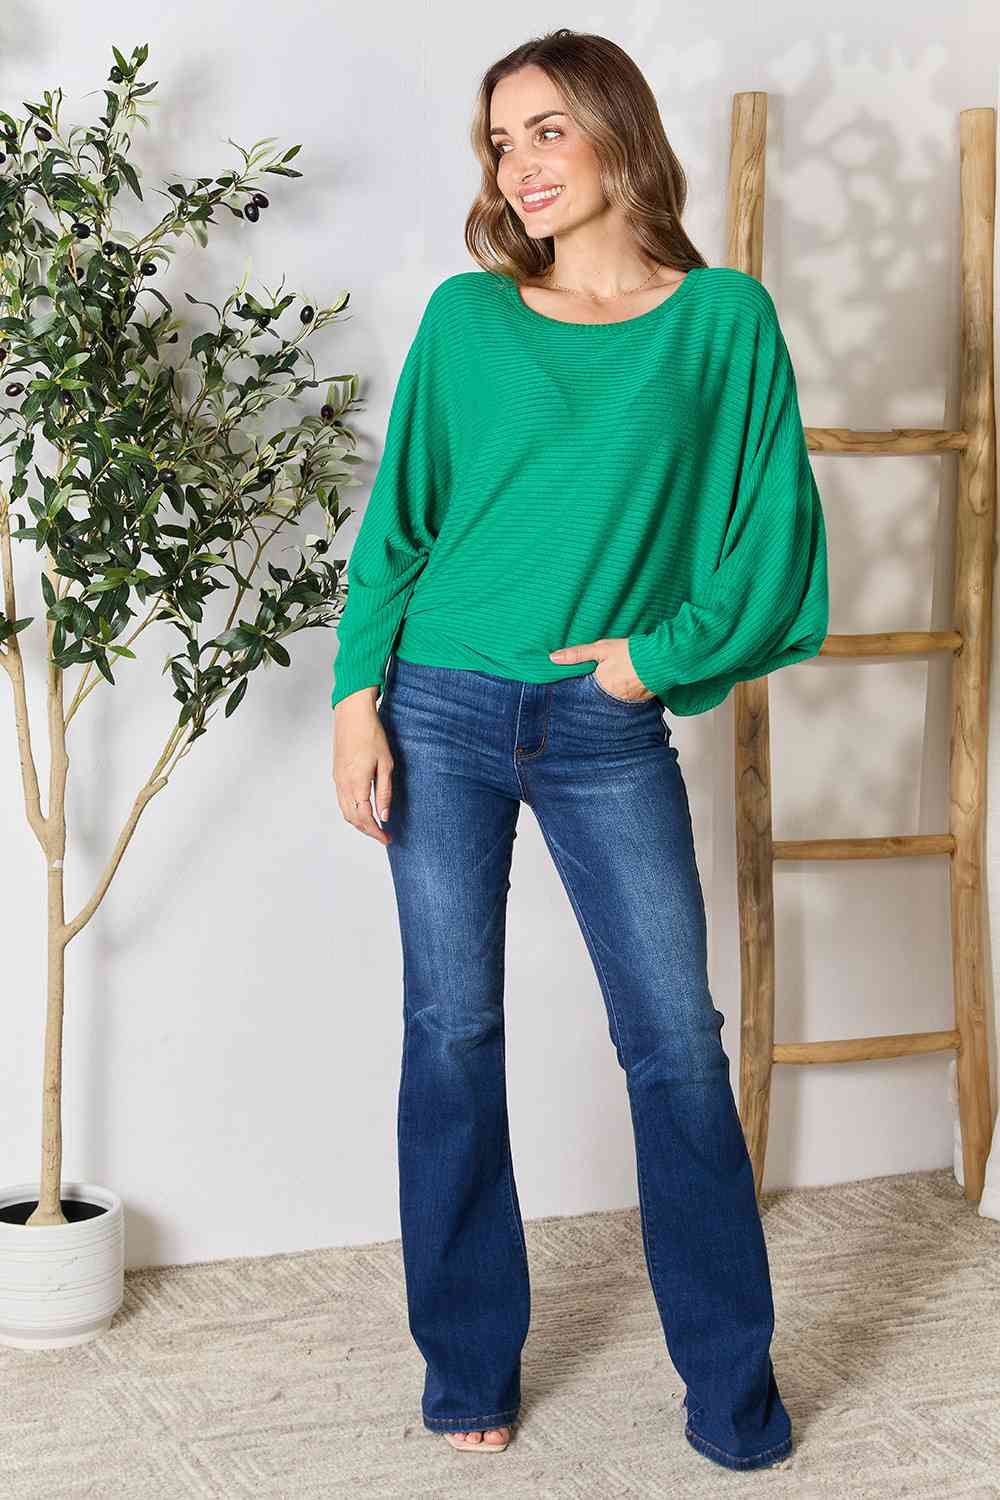 Round Neck Batwing Sleeve Blouse - Women’s Clothing & Accessories - Shirts & Tops - 4 - 2024